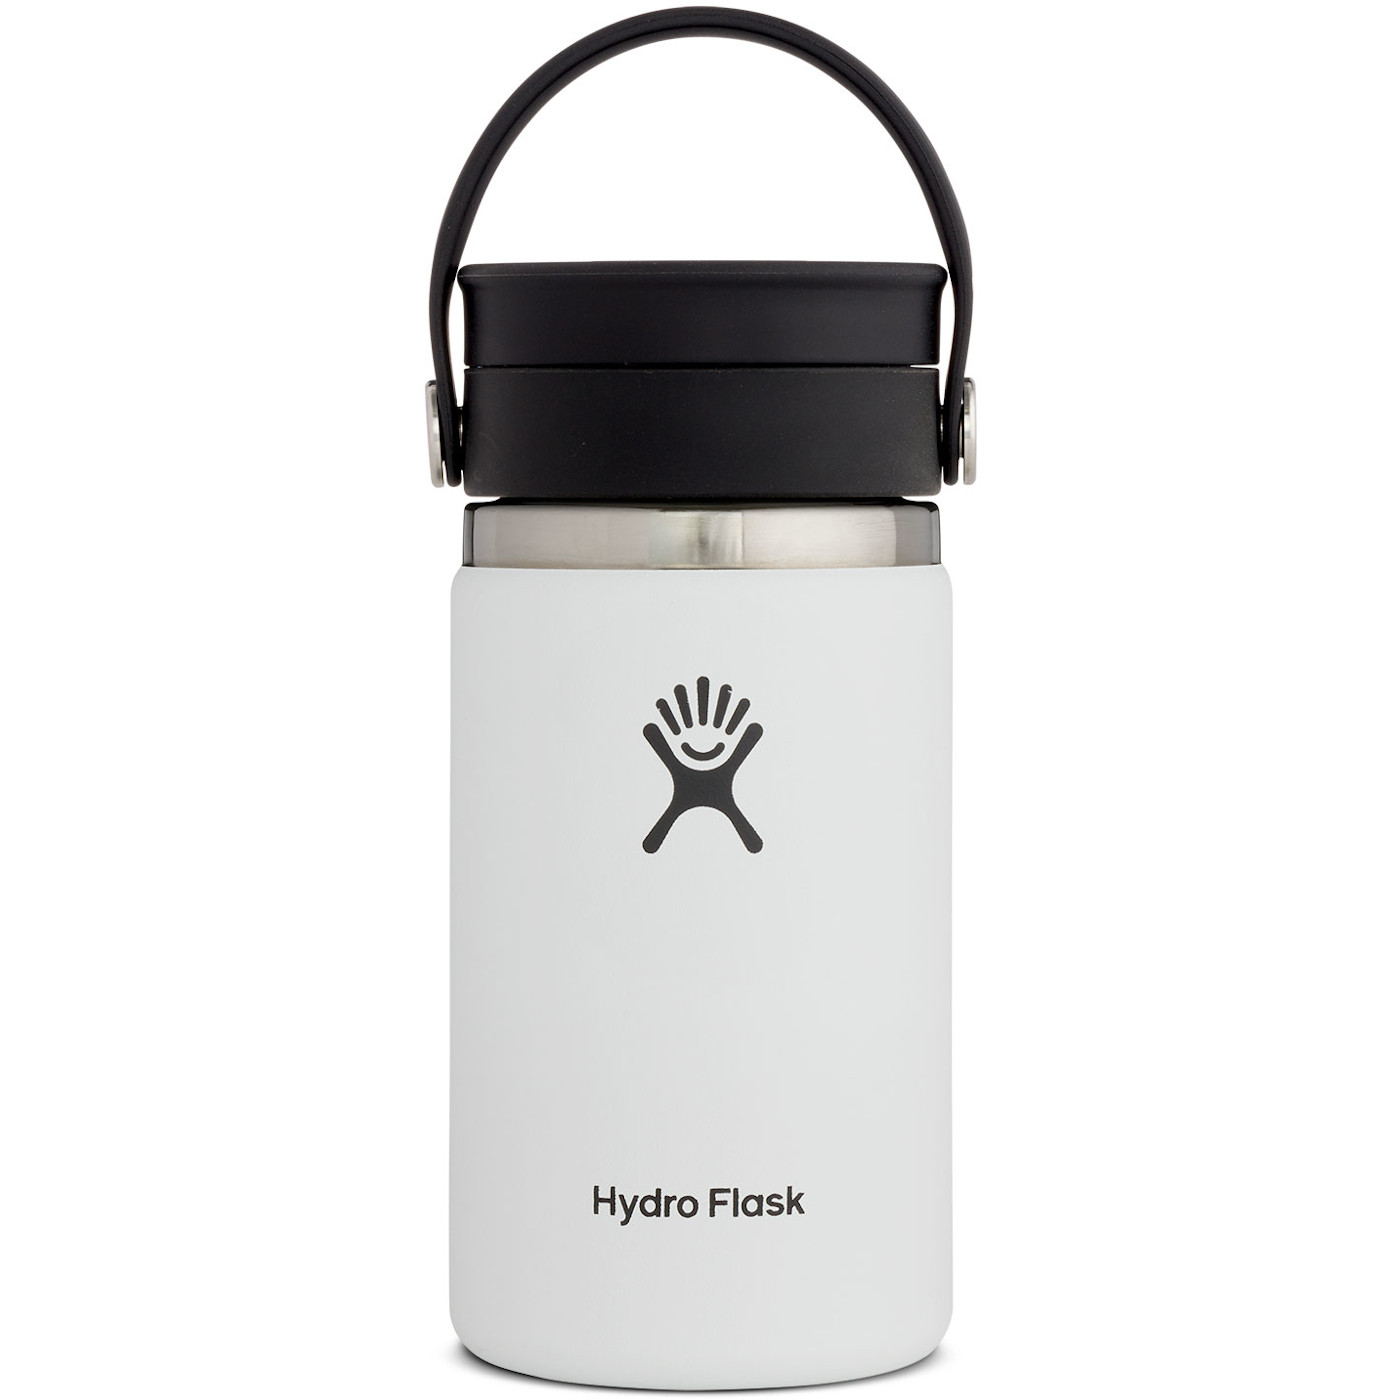 Image of Hydro Flask 12 oz Wide Mouth Coffee Flask + Flex Sip Lid - 354 ml - White